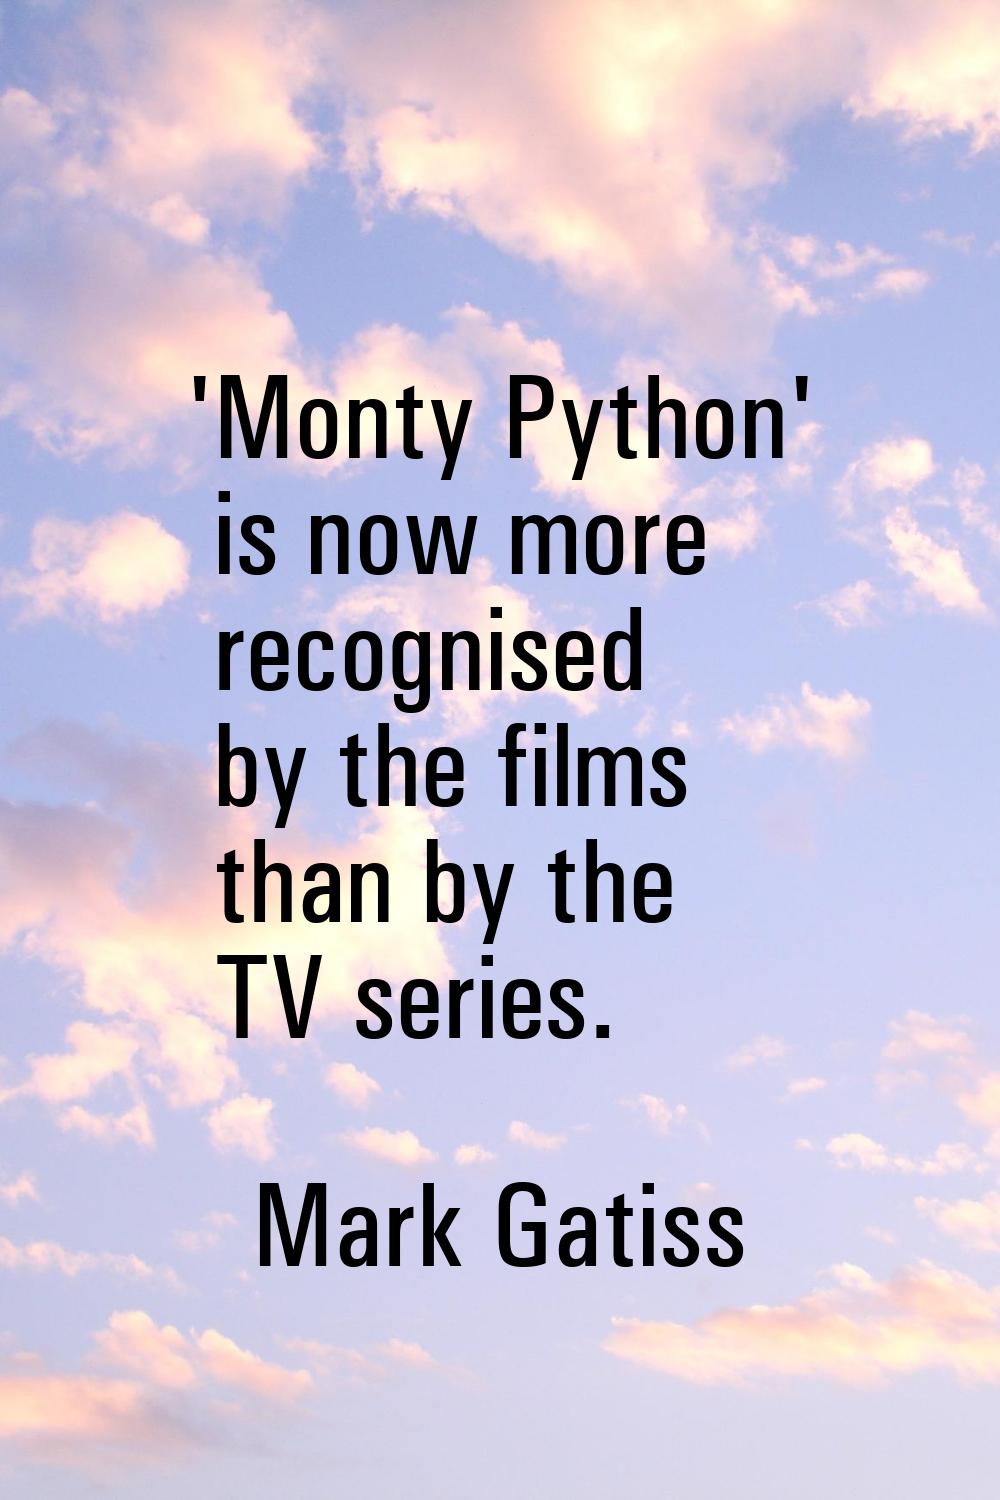 'Monty Python' is now more recognised by the films than by the TV series.